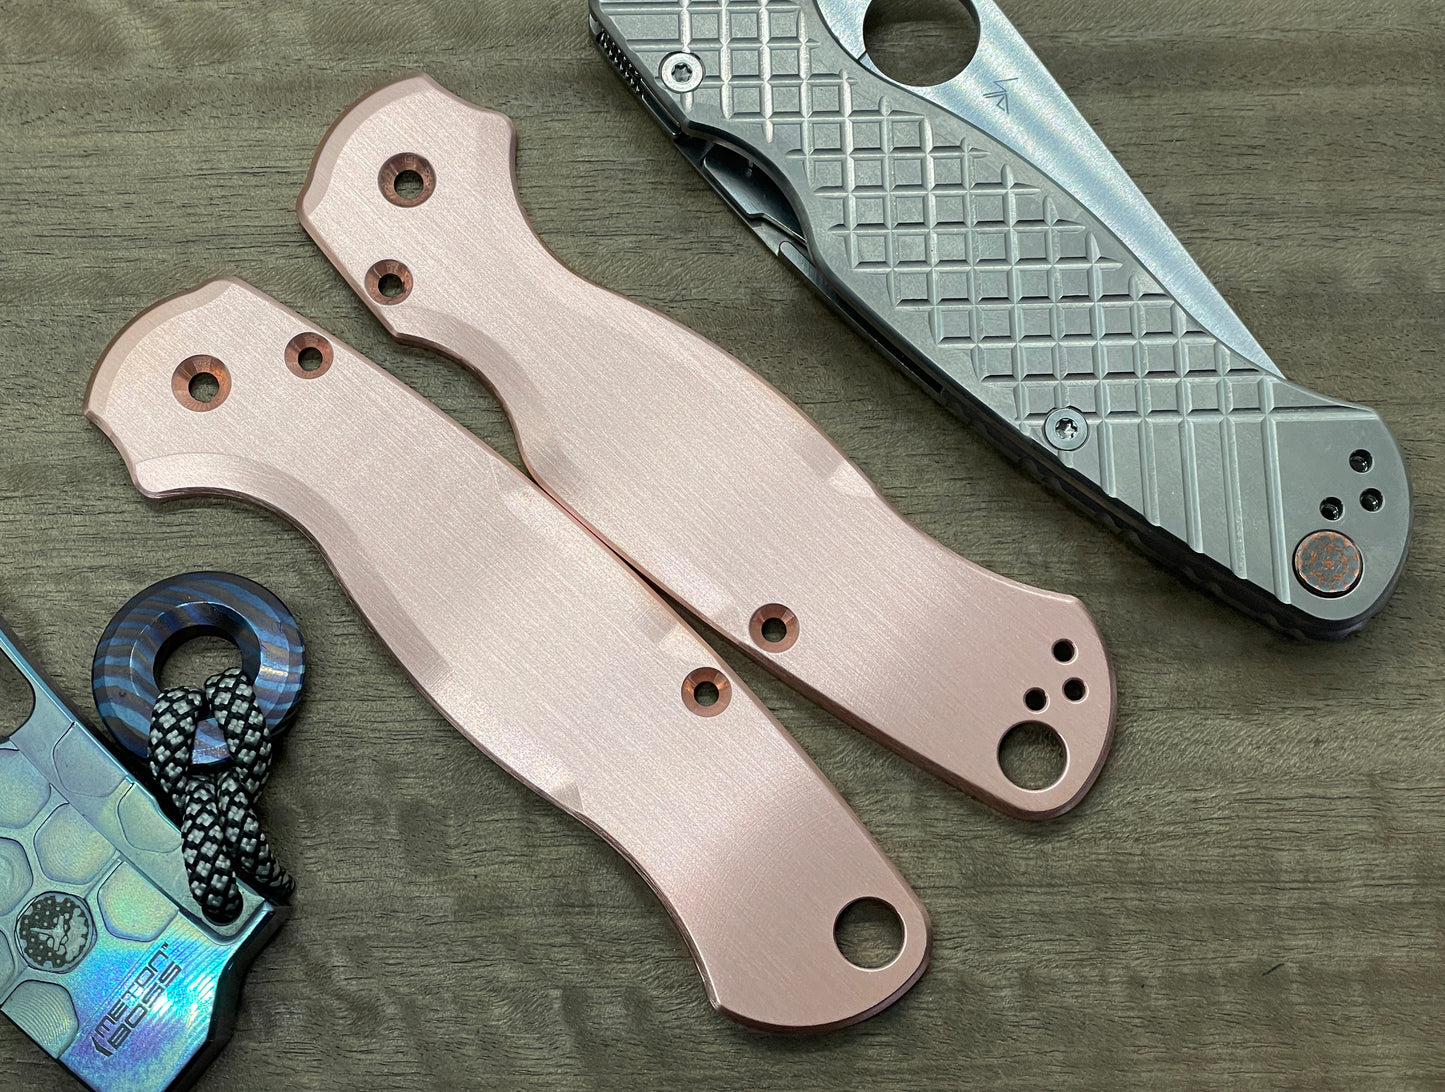 Brushed Copper Scales for Spyderco Paramilitary 2 PM2